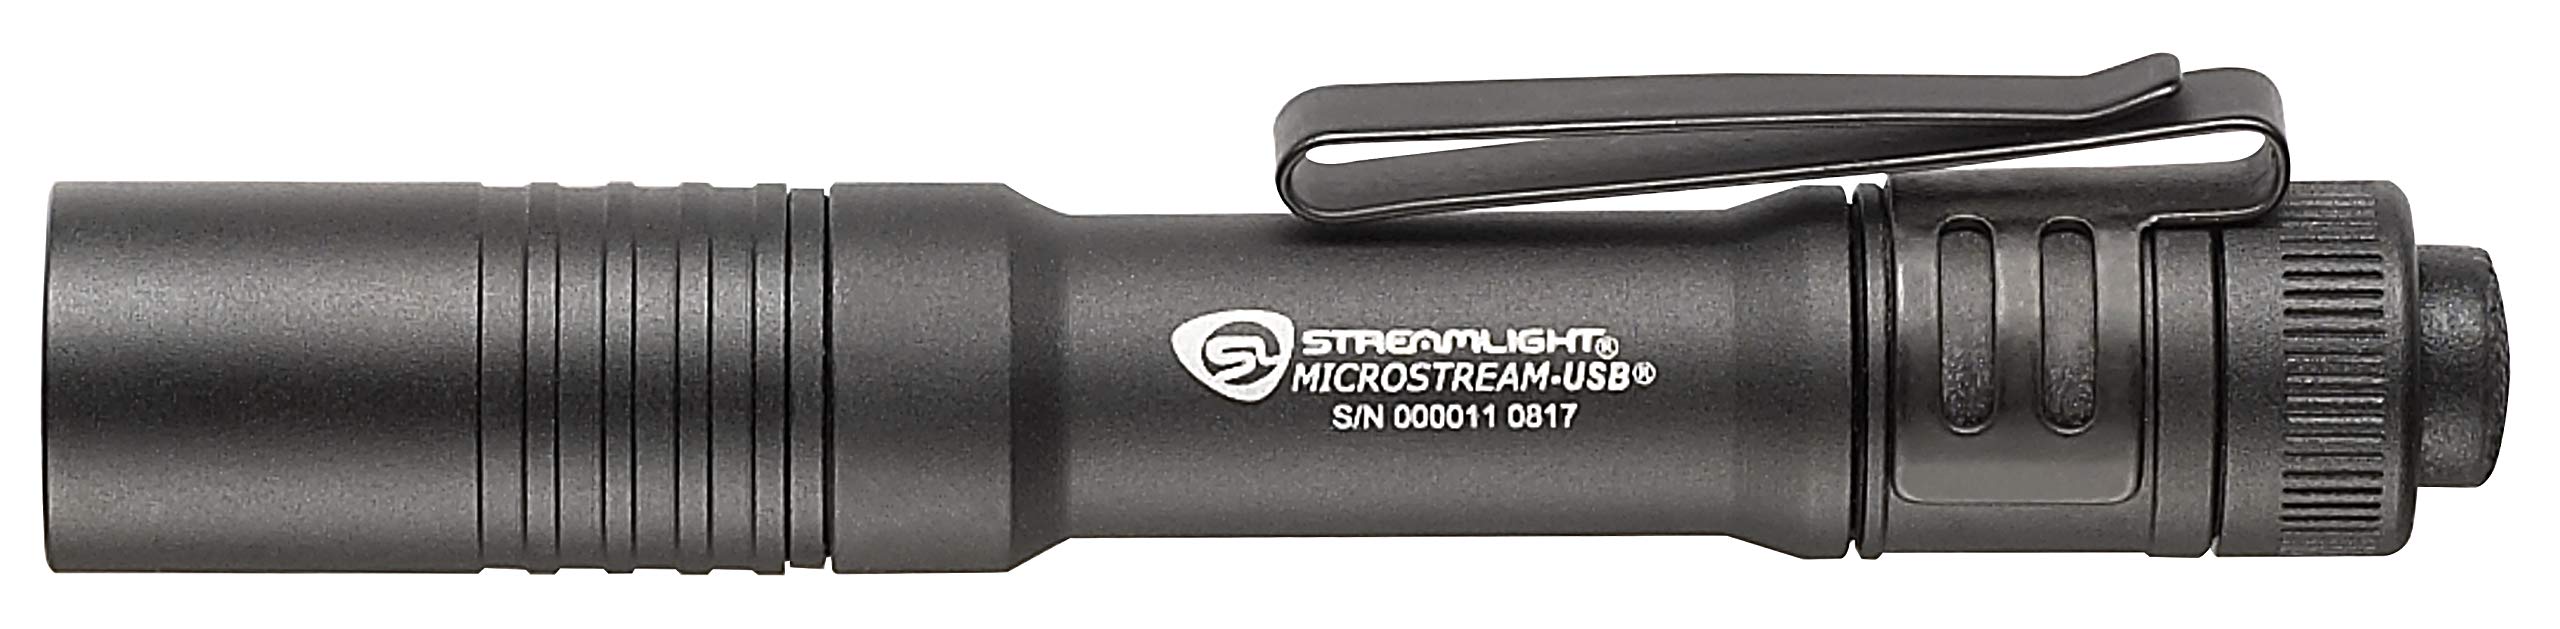 Streamlight 66604 MicroStream 250-Lumen EDC Ultra-Compact Flashlight with USB Rechargeable Battery, Box Packaged, Black